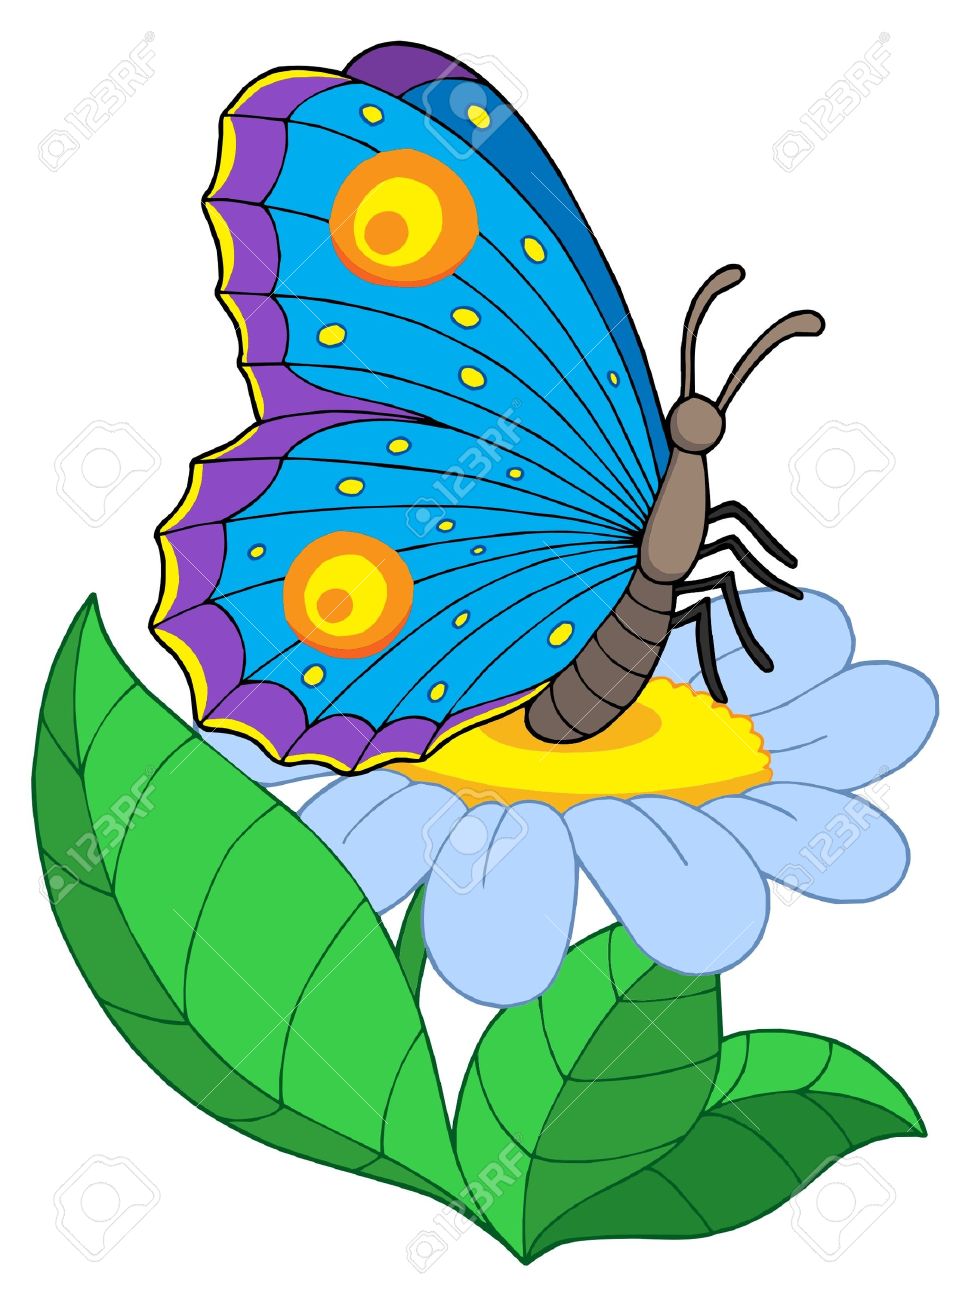 clip art flower and butterfly - photo #50